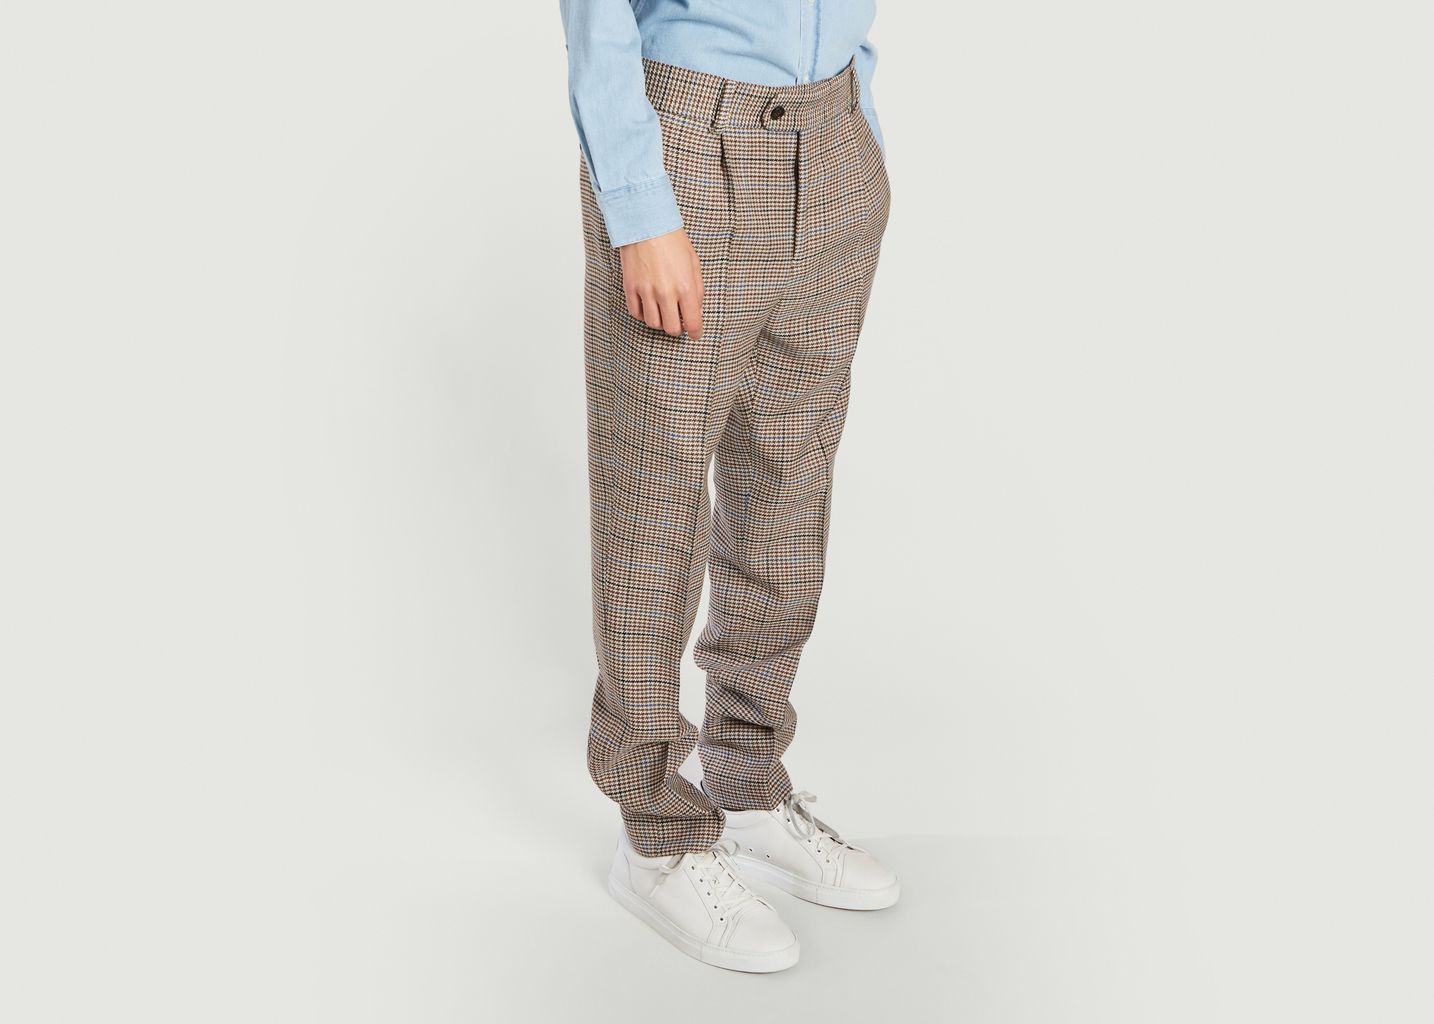 Checked suit trousers - Gant